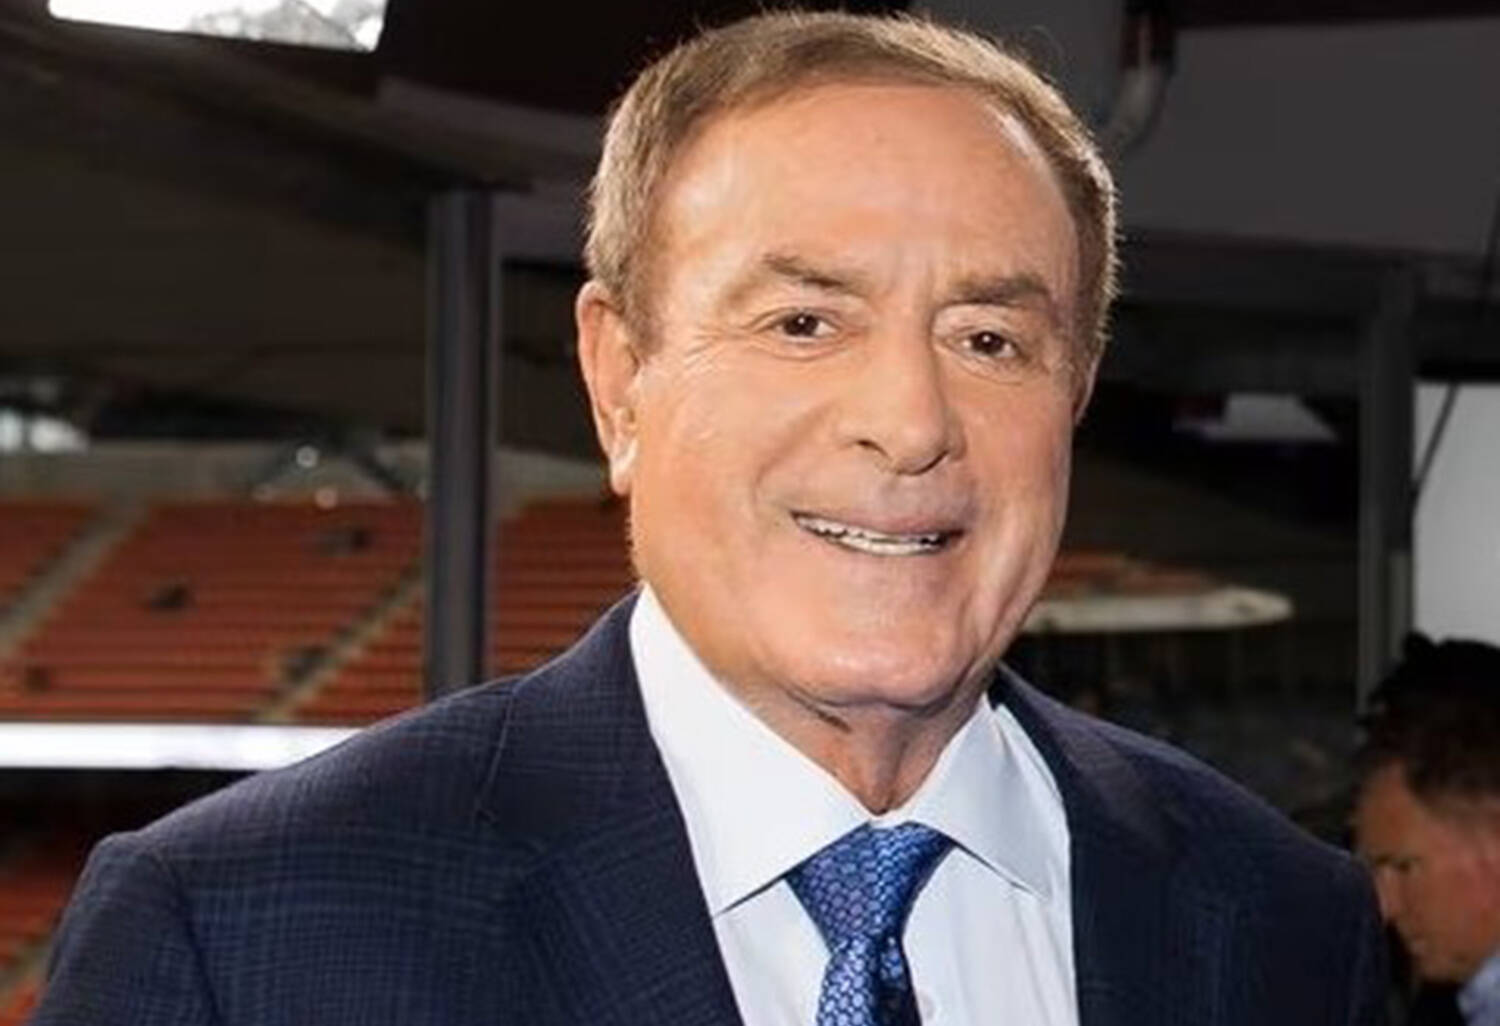 A couple of errors by Al Michaels during Thursday Night Football created some backlash on social media. photo courtesy of Amazon Prime